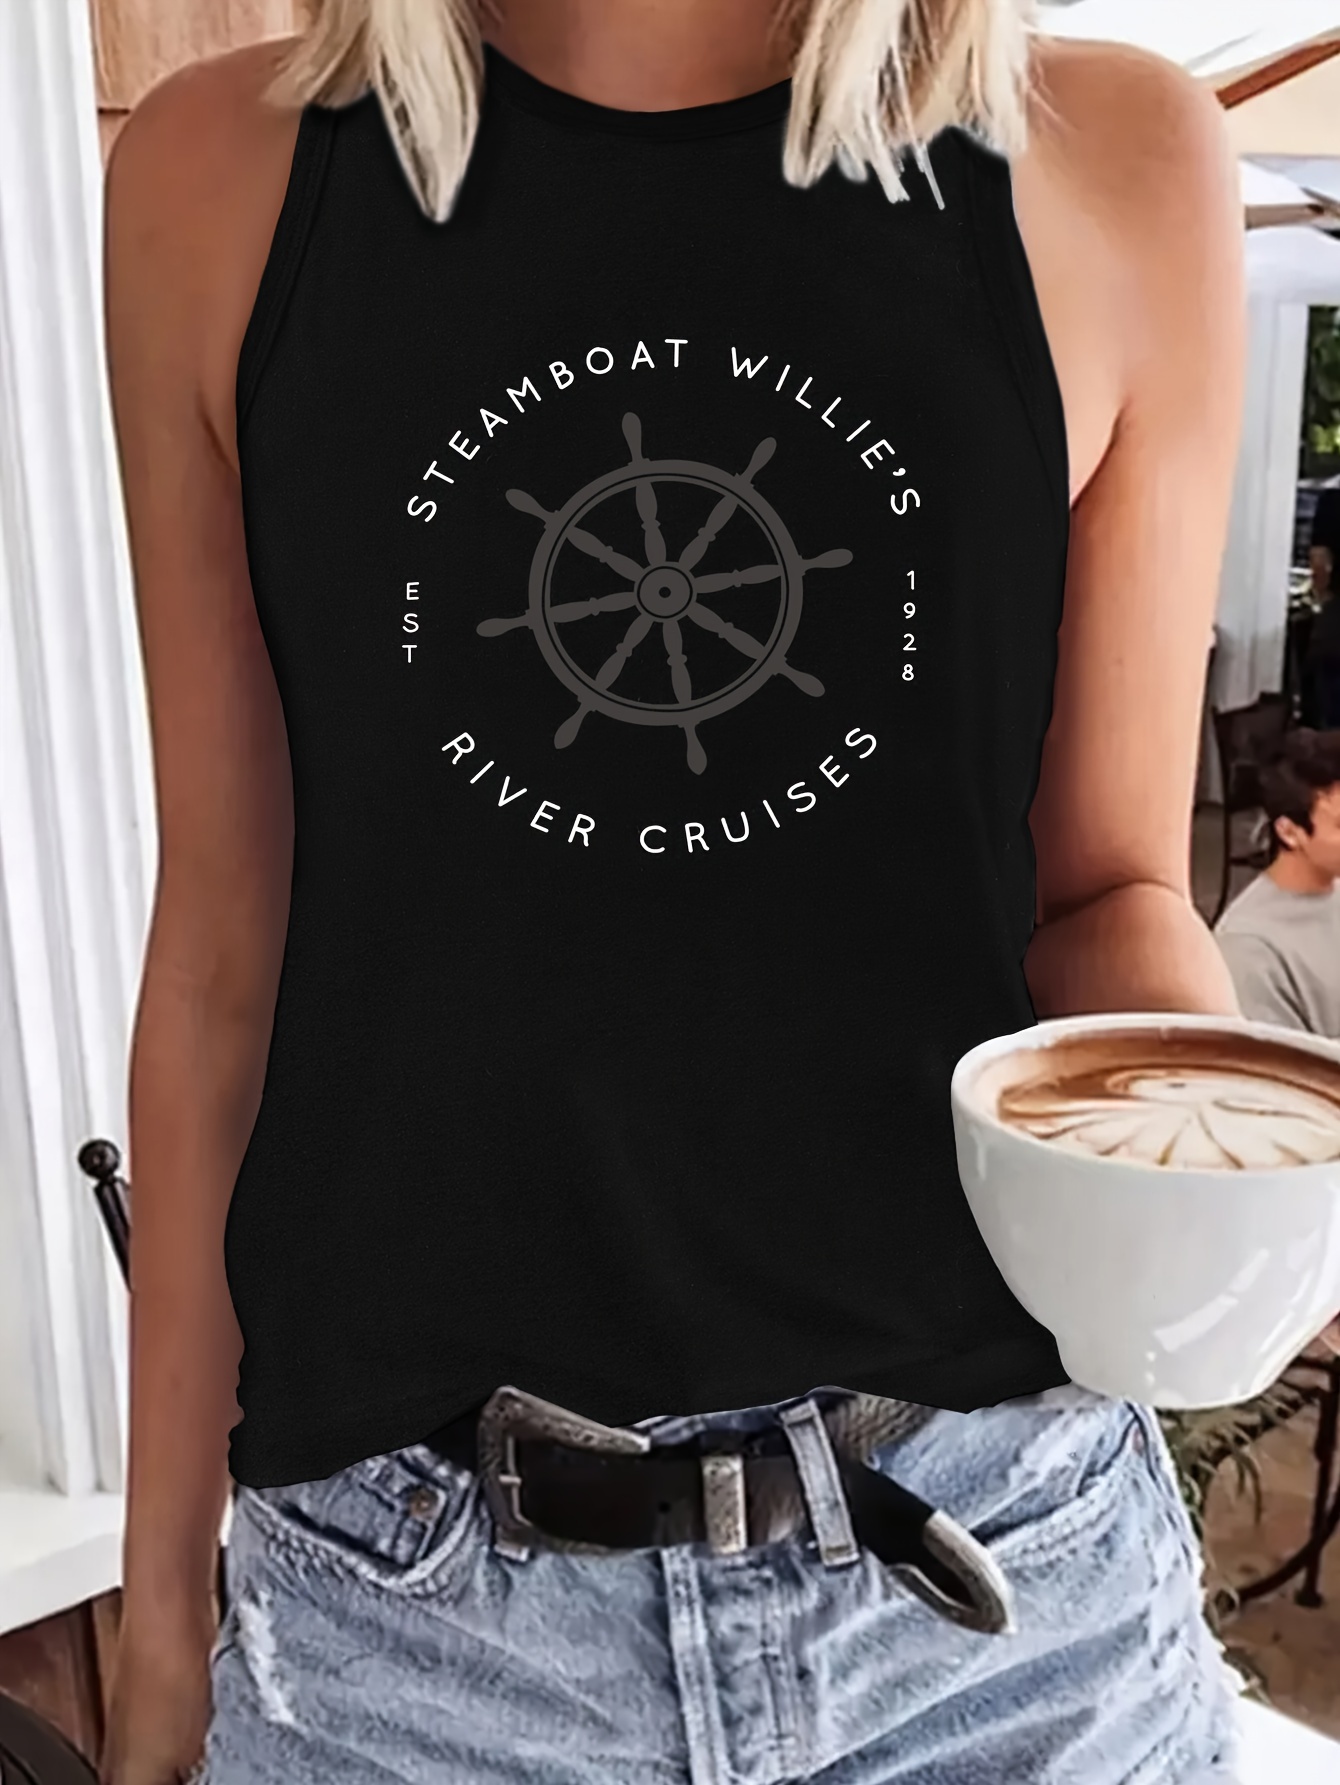 https://img.kwcdn.com/product/mickey-mouse-crew-neck-tank-top/d69d2f15w98k18-b52e1796/fancy/3be29cbe-2149-4662-b255-05bdadc381ad.jpg?imageView2/2/w/500/q/60/format/webp